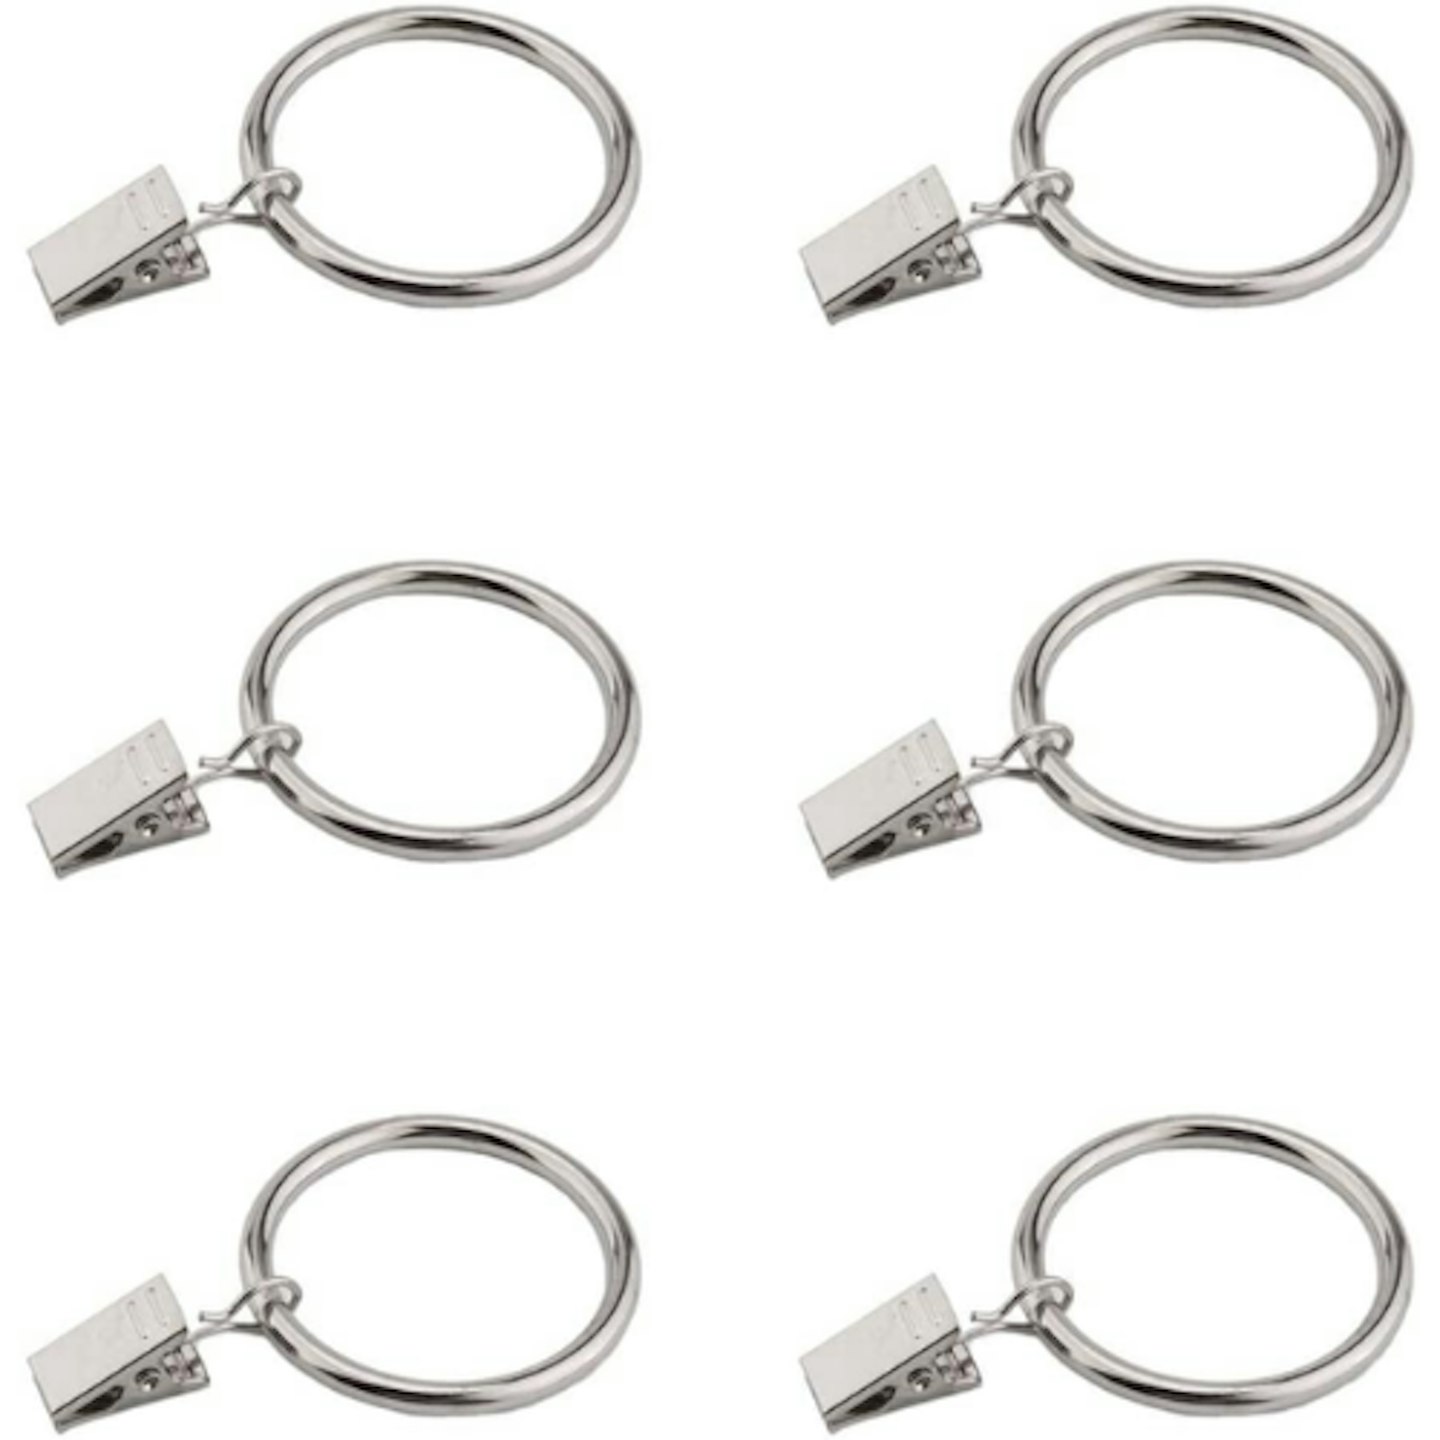 Coideal Silver Curtain Ring Clips with Hook